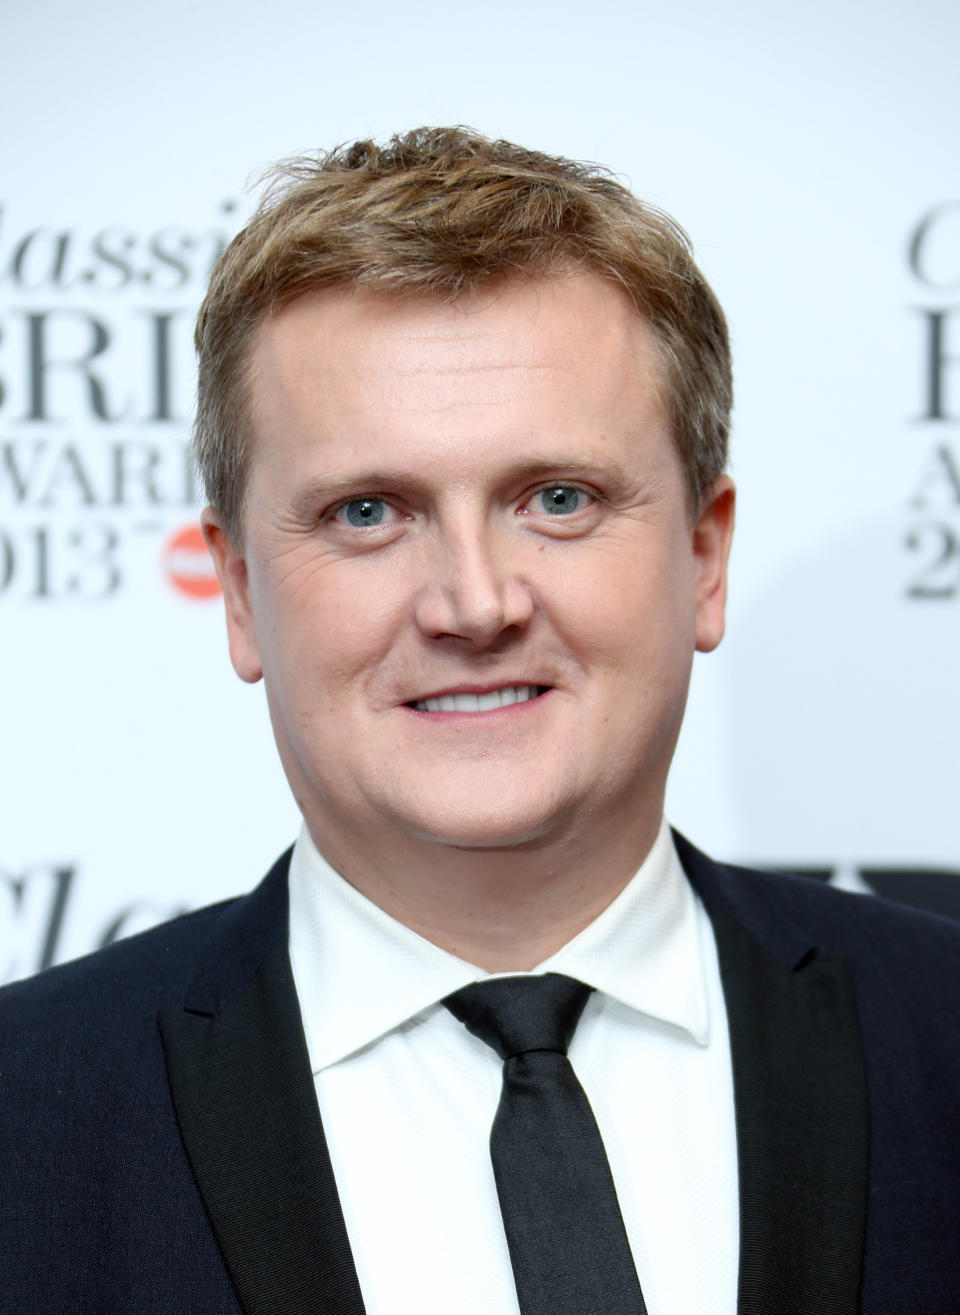 <strong>Now:</strong> Following the axing of 'Daybreak', which he presented with Lorraine Kelly, Aled now hosts 'Weekend'. He had previously fronted 'Songs Of Praise'on BBC One.